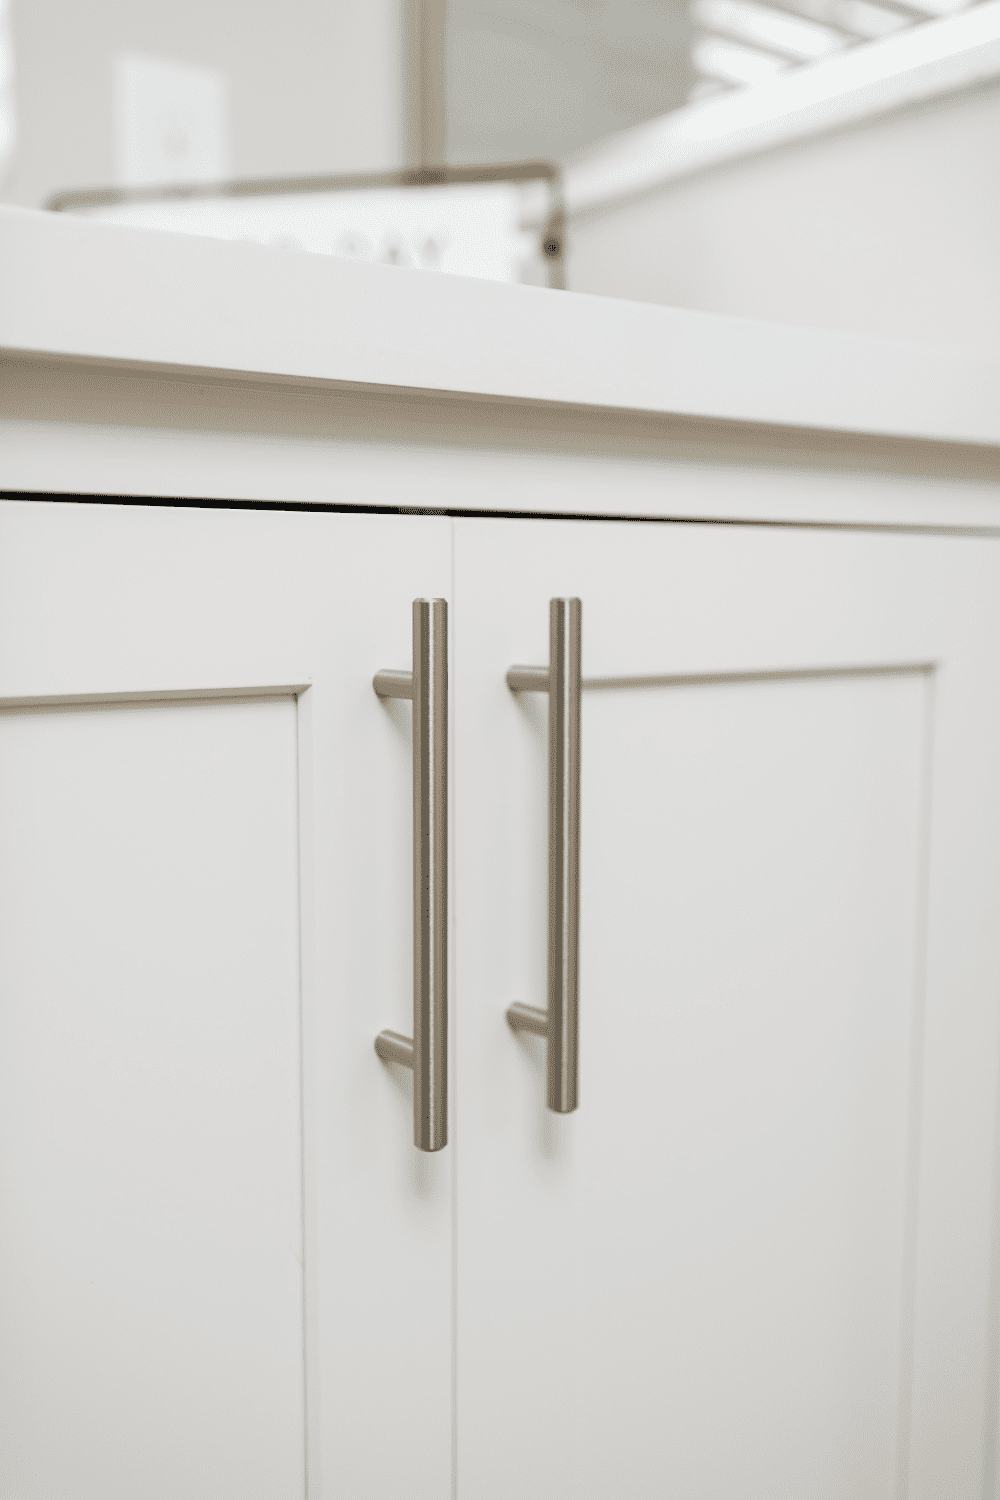 Nicholas Design Build | A close up of a white cabinet with metal handles for a bathroom remodel.